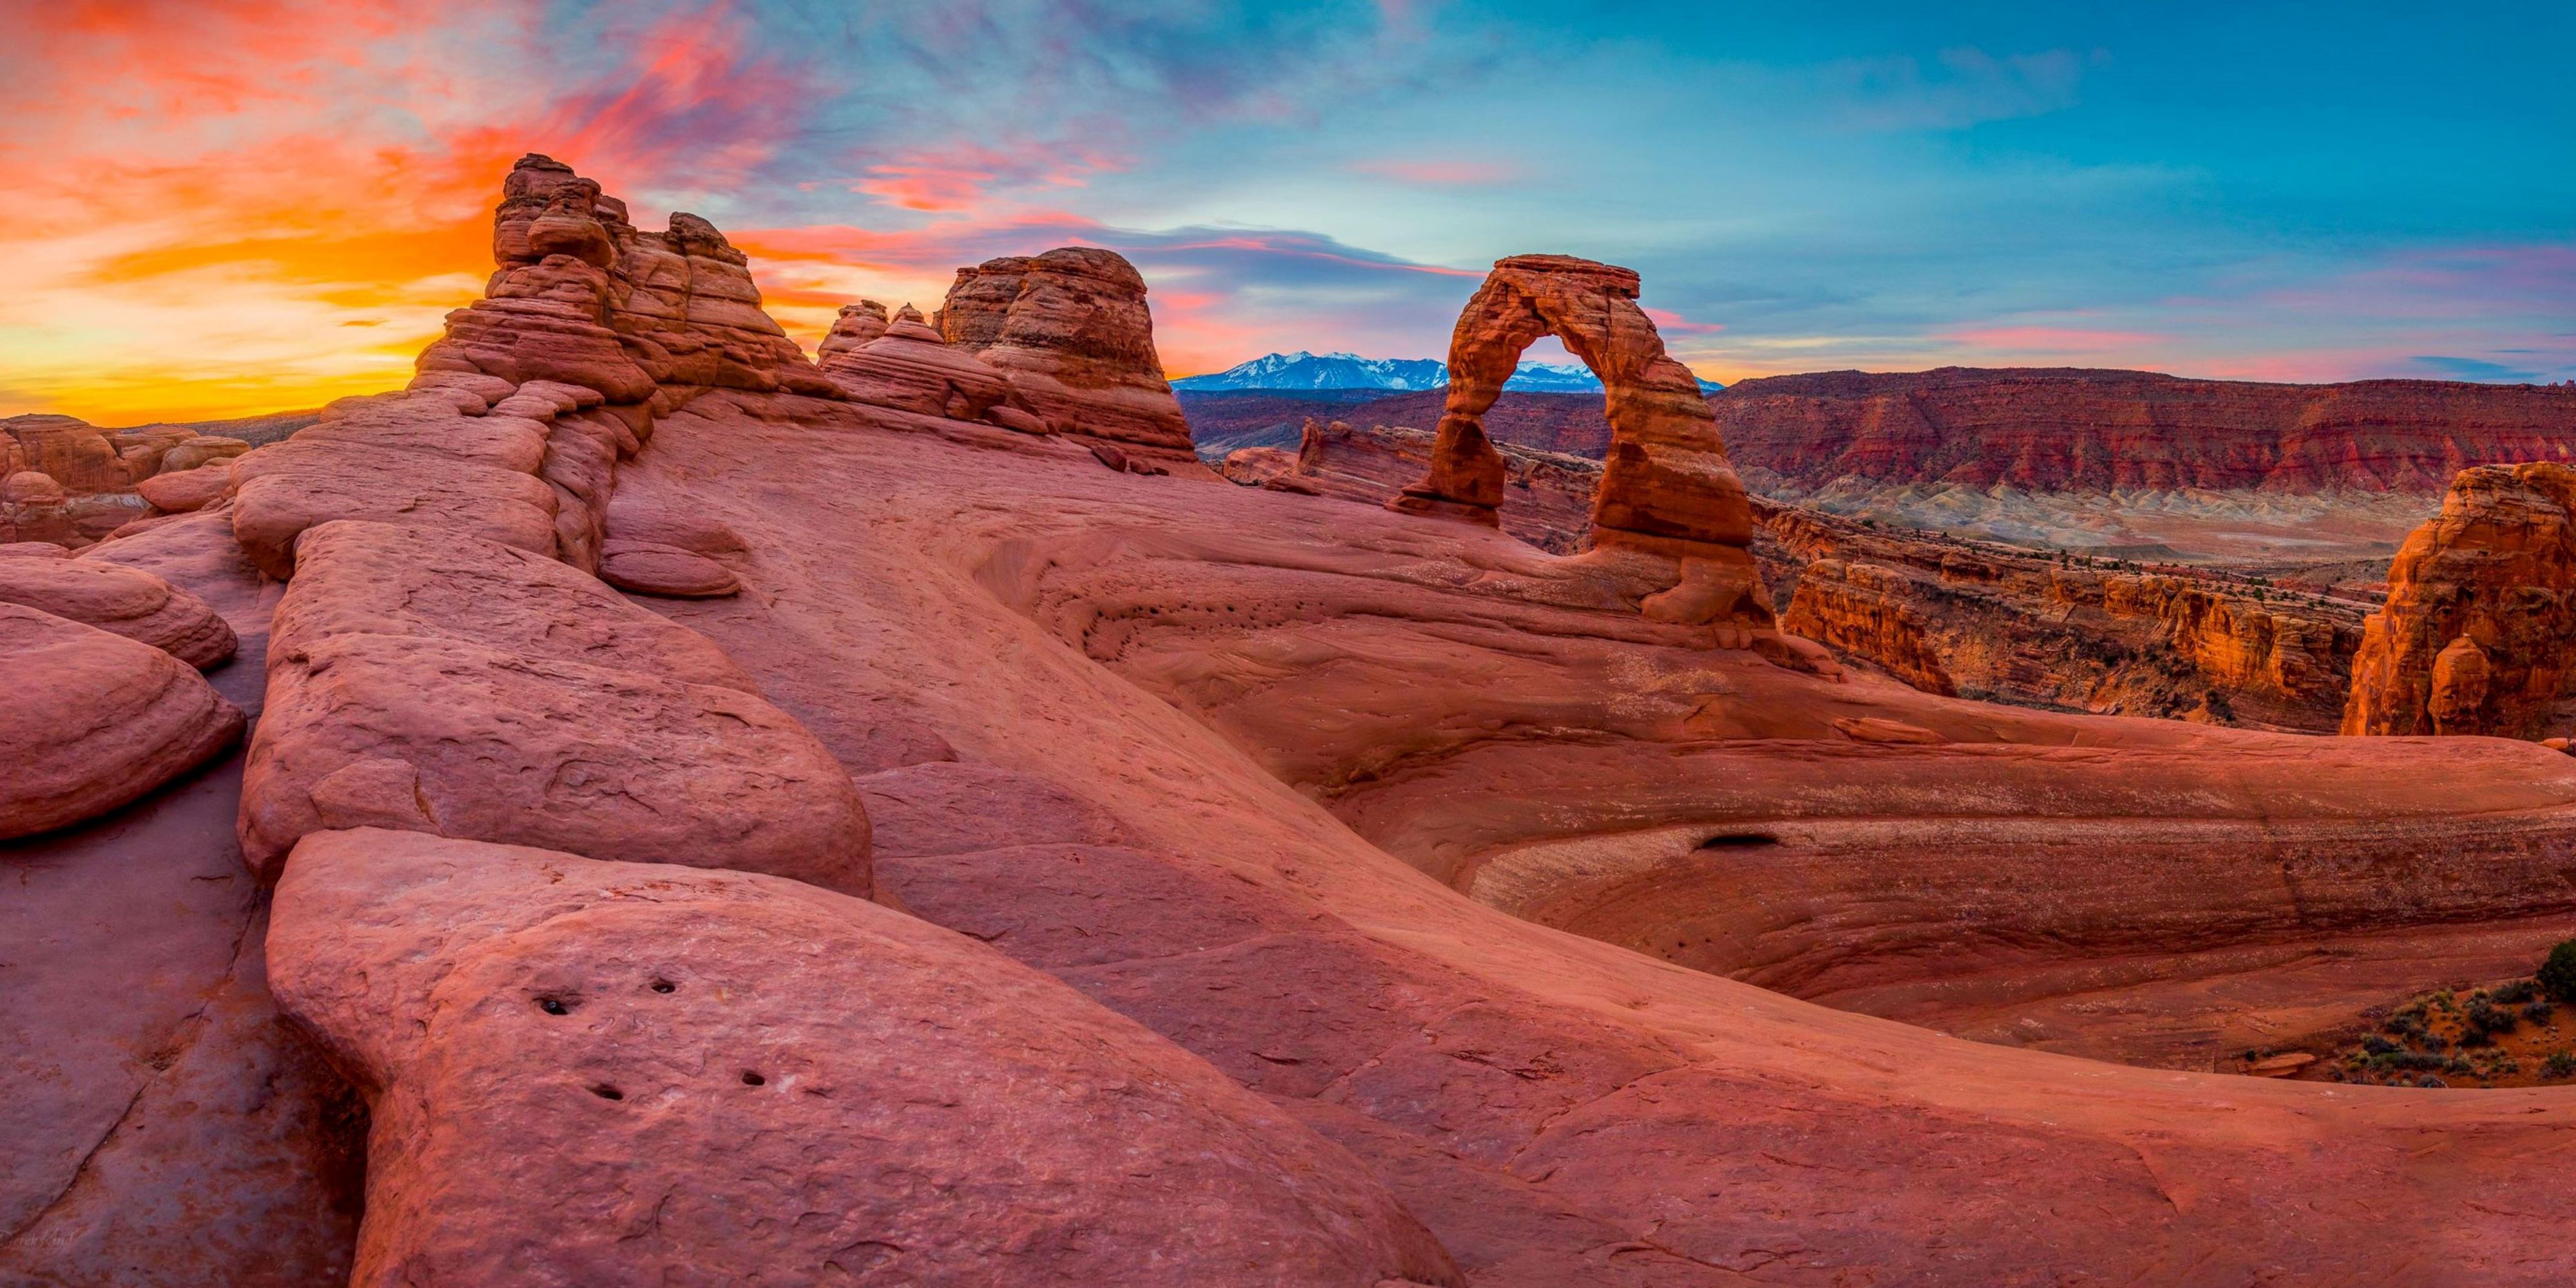 Located 3 miles from Arches National Park, 28 miles from Canyonlands National Park and 2 miles from downtown Moab, let us be your base camp for all your Moab adventures. 